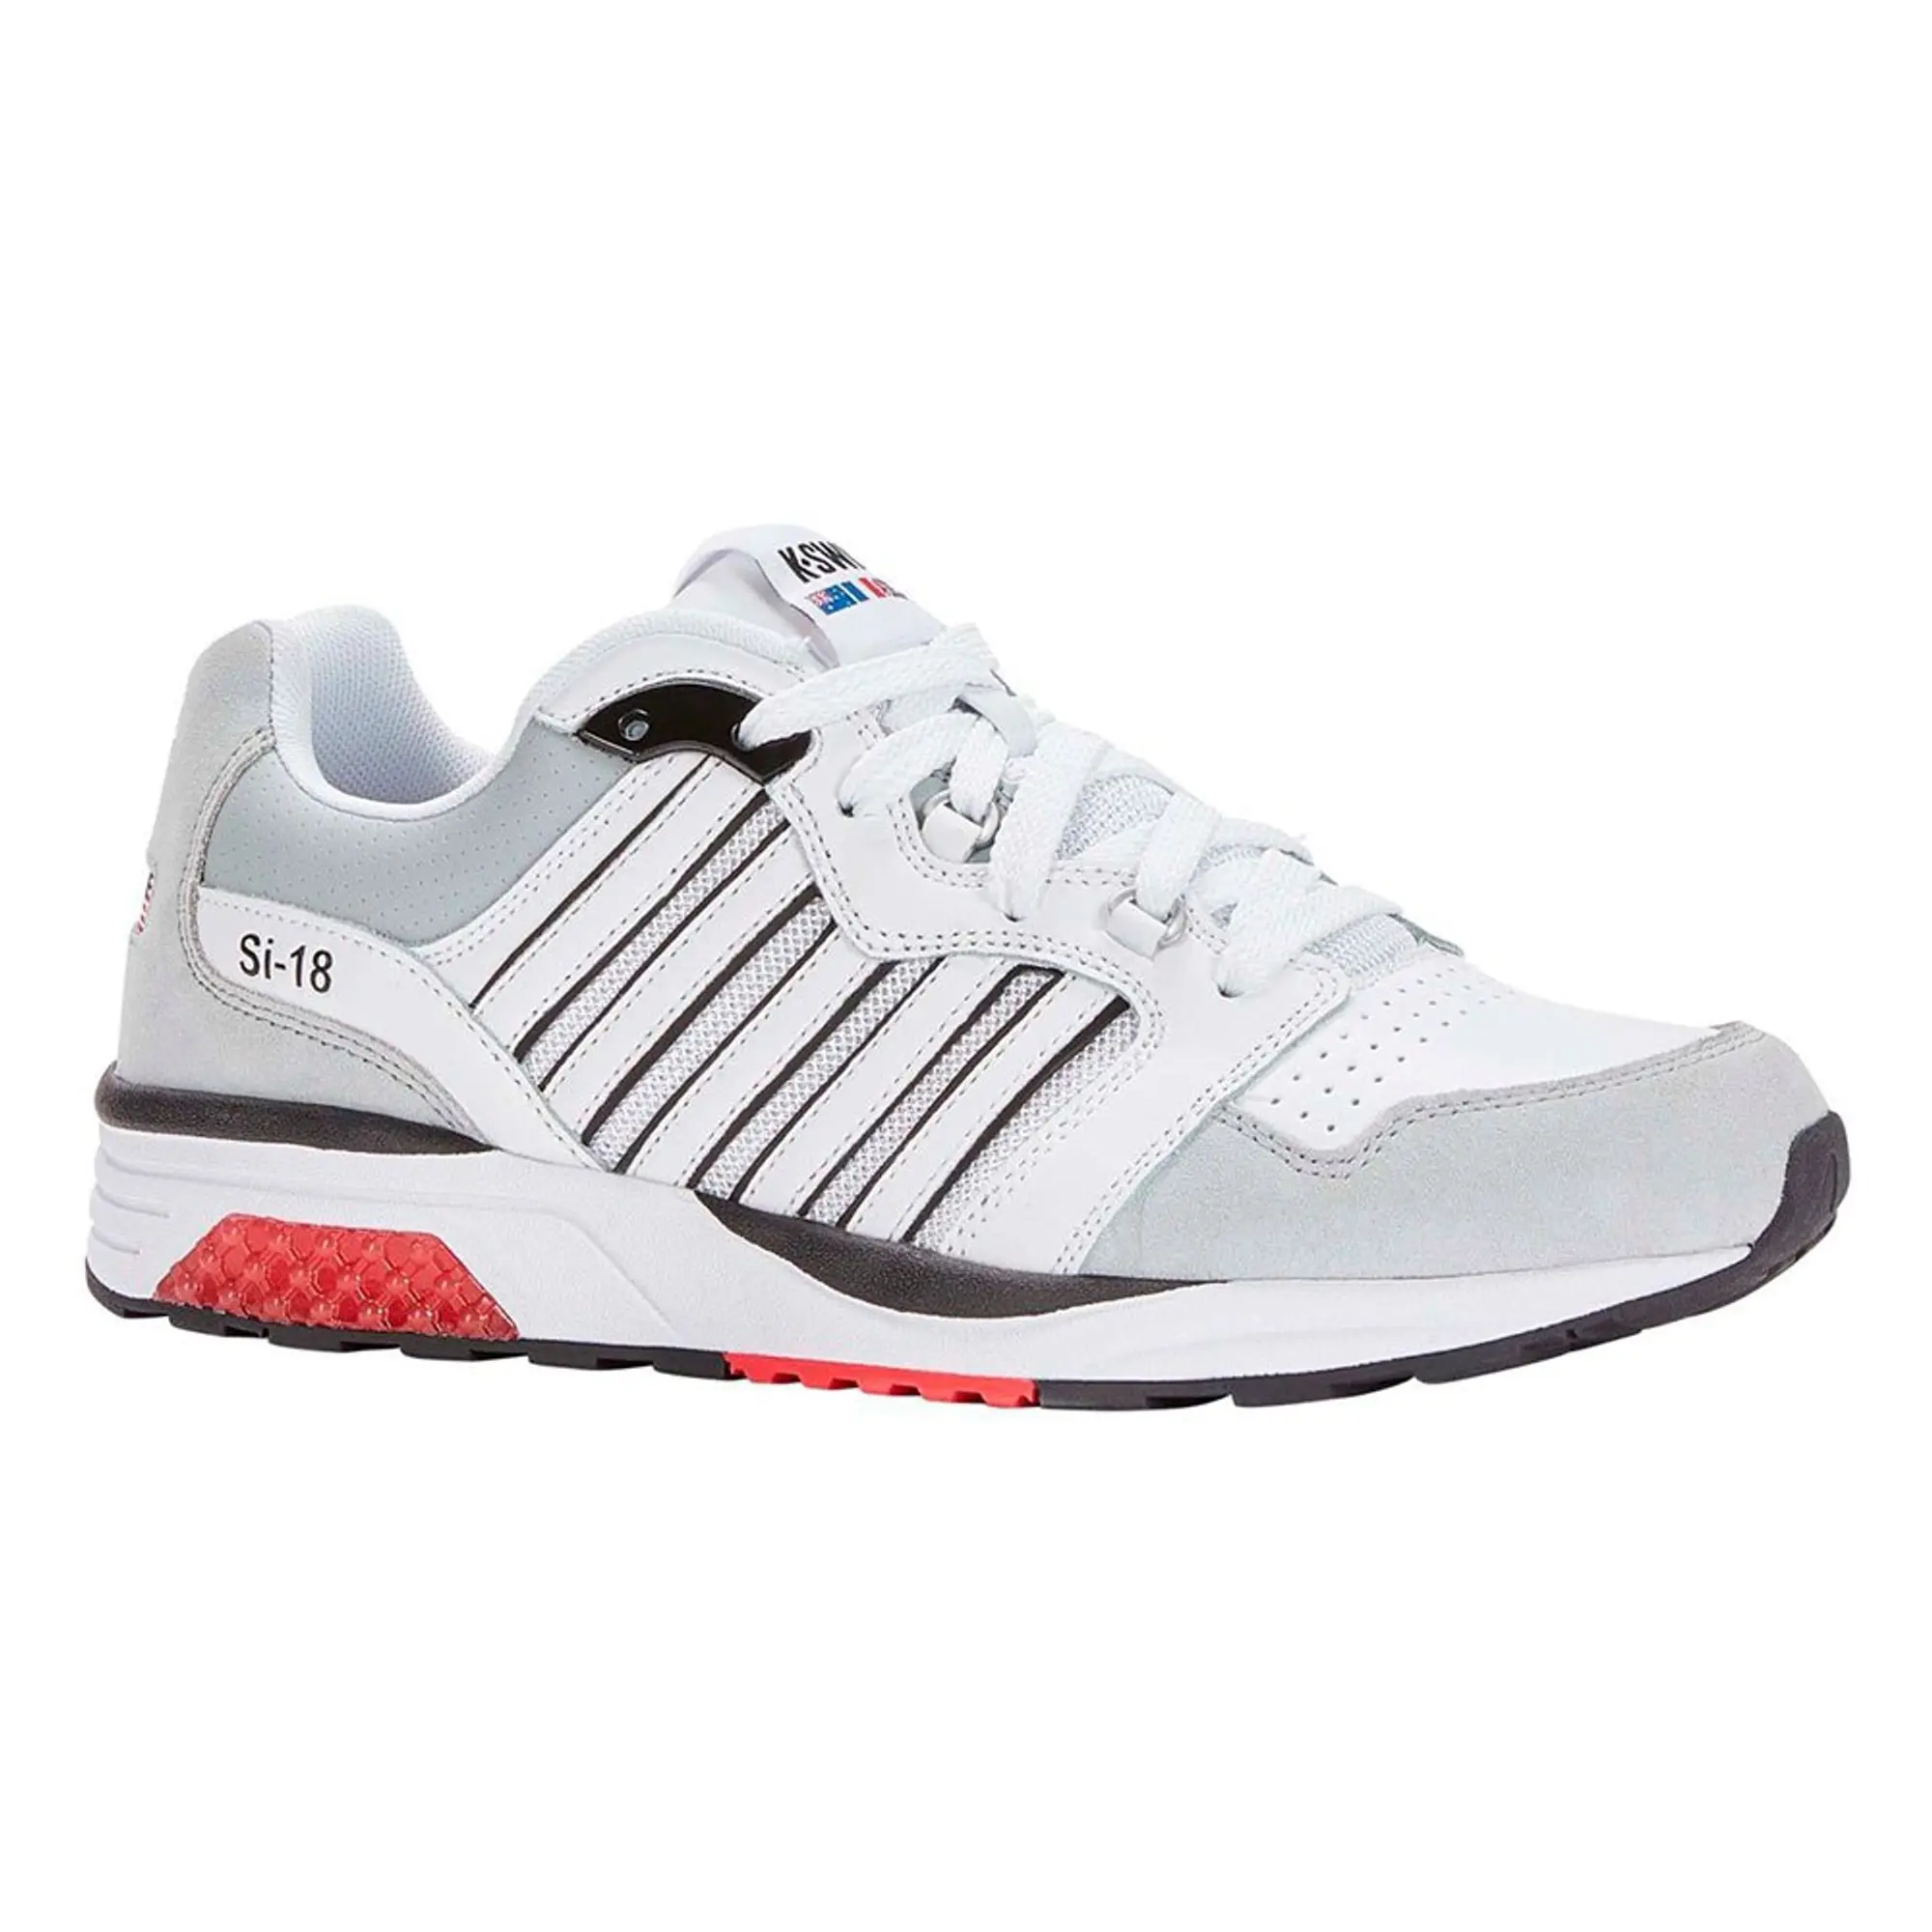 K-swiss Si-18 Rannell Sde Usa Trainers White Black Red